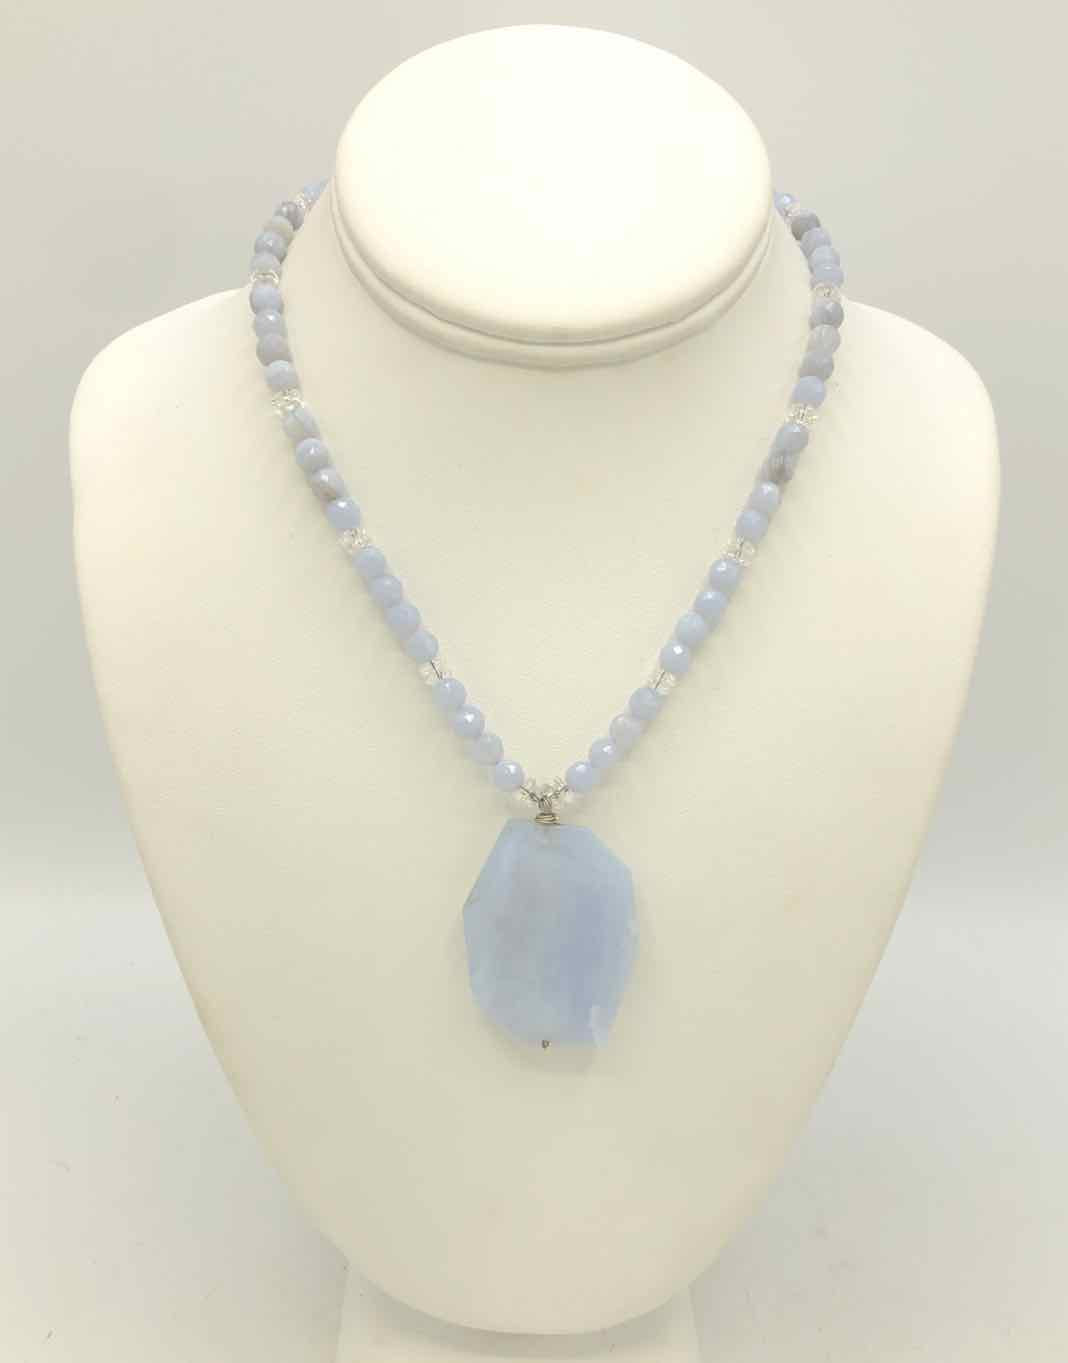 Whitney Kelly Sterling SilverTextured Blue Lace Agate Necklace Toggle 129A2  | eBay